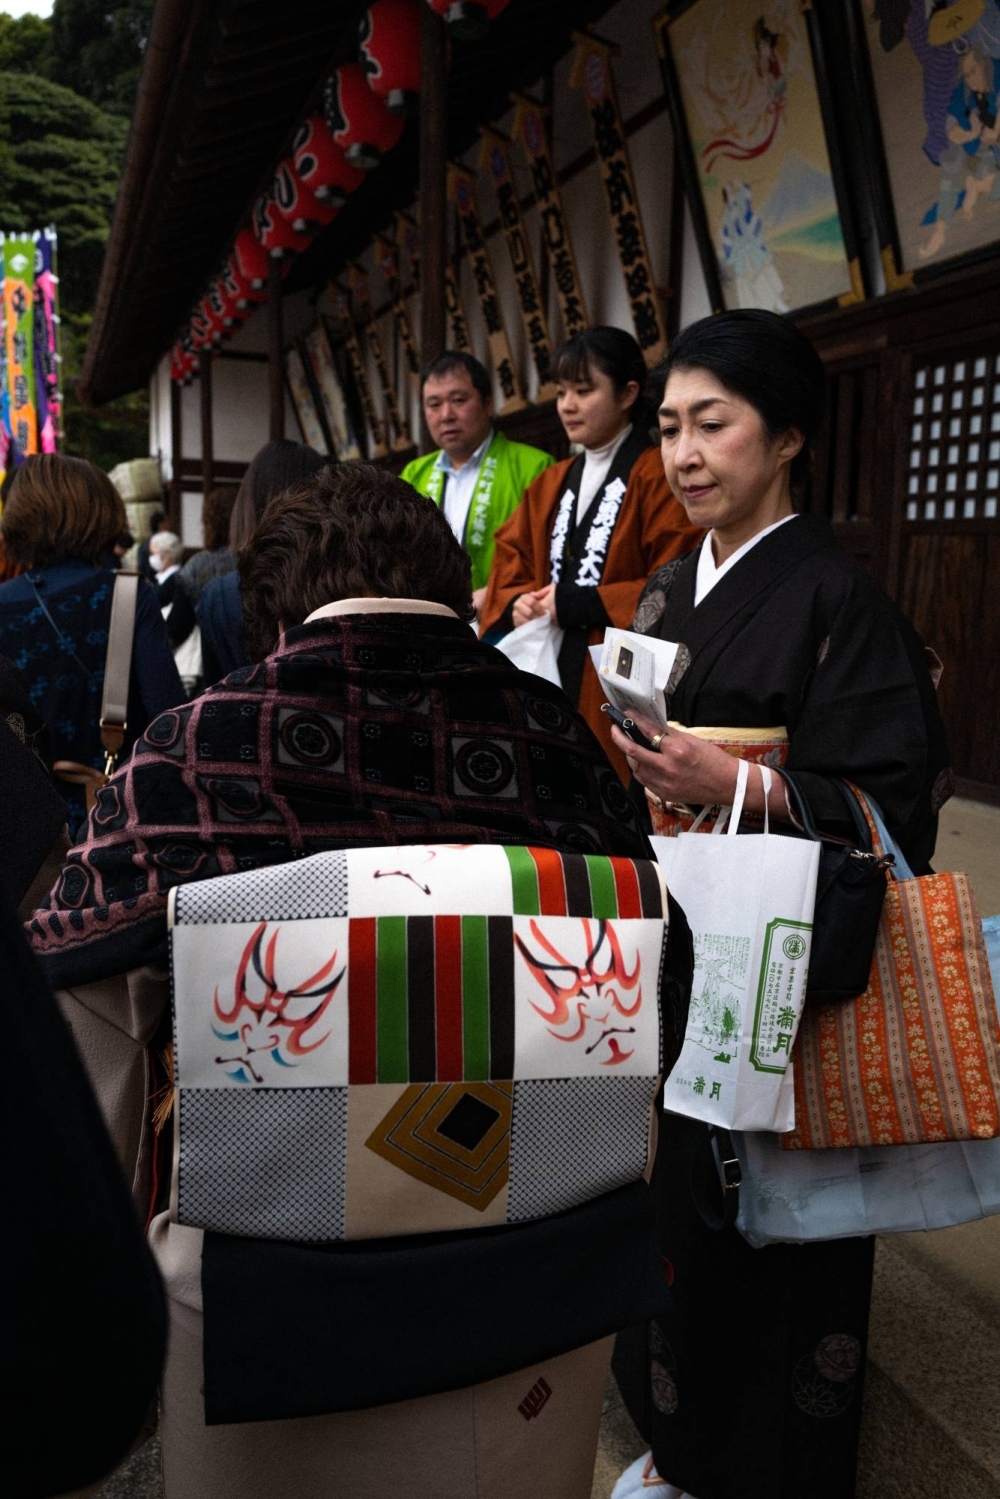 Tickets to the comeback kabuki performances sold out fast, despite prices ranging from ¥4,000 to ¥20,000 ($30 to $130). 